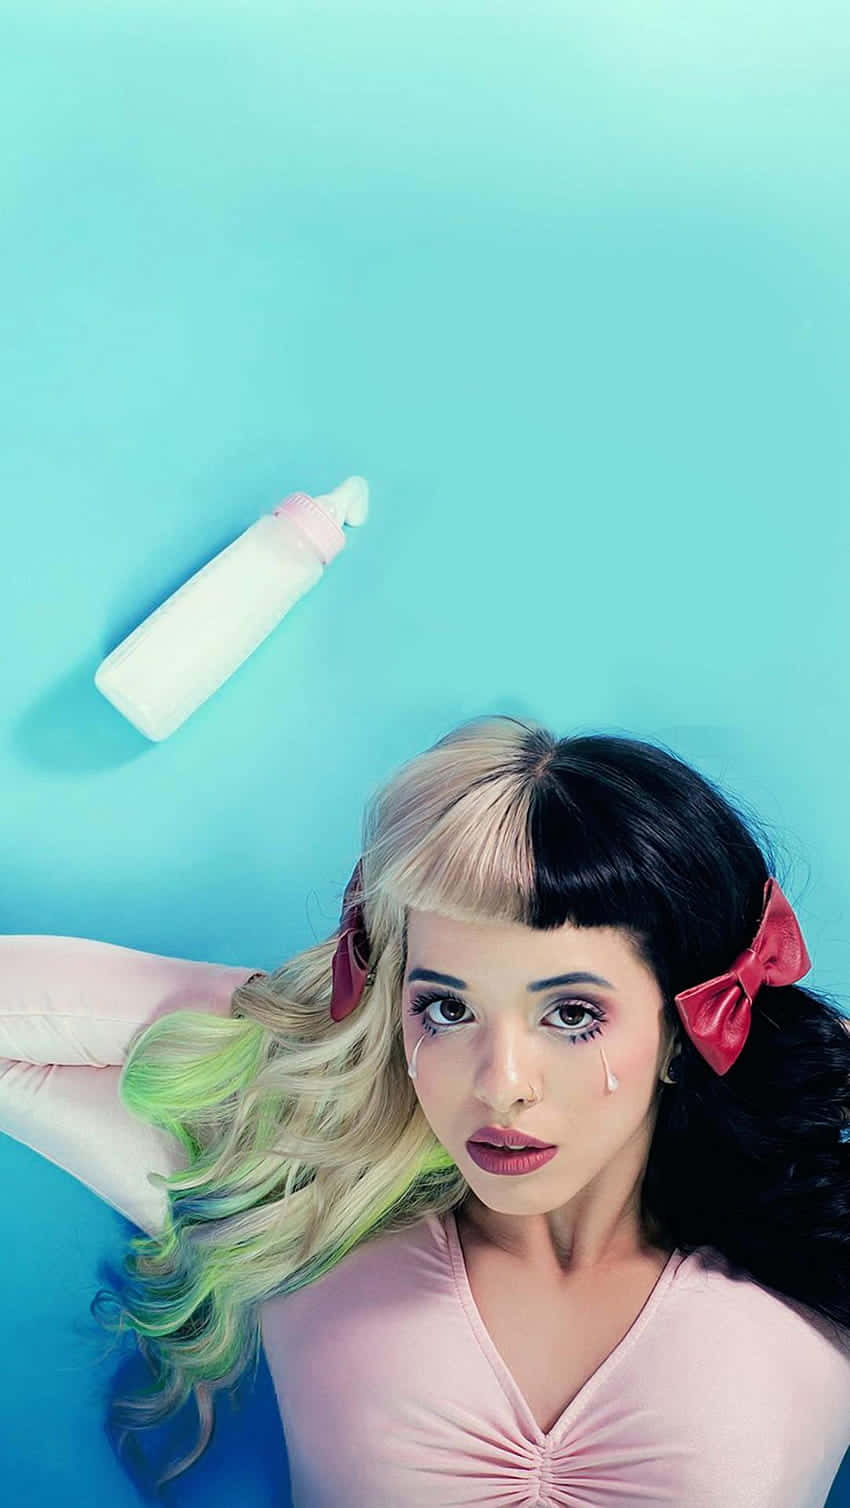 Melanie Martinez striking a pose in a whimsical, pastel-themed room